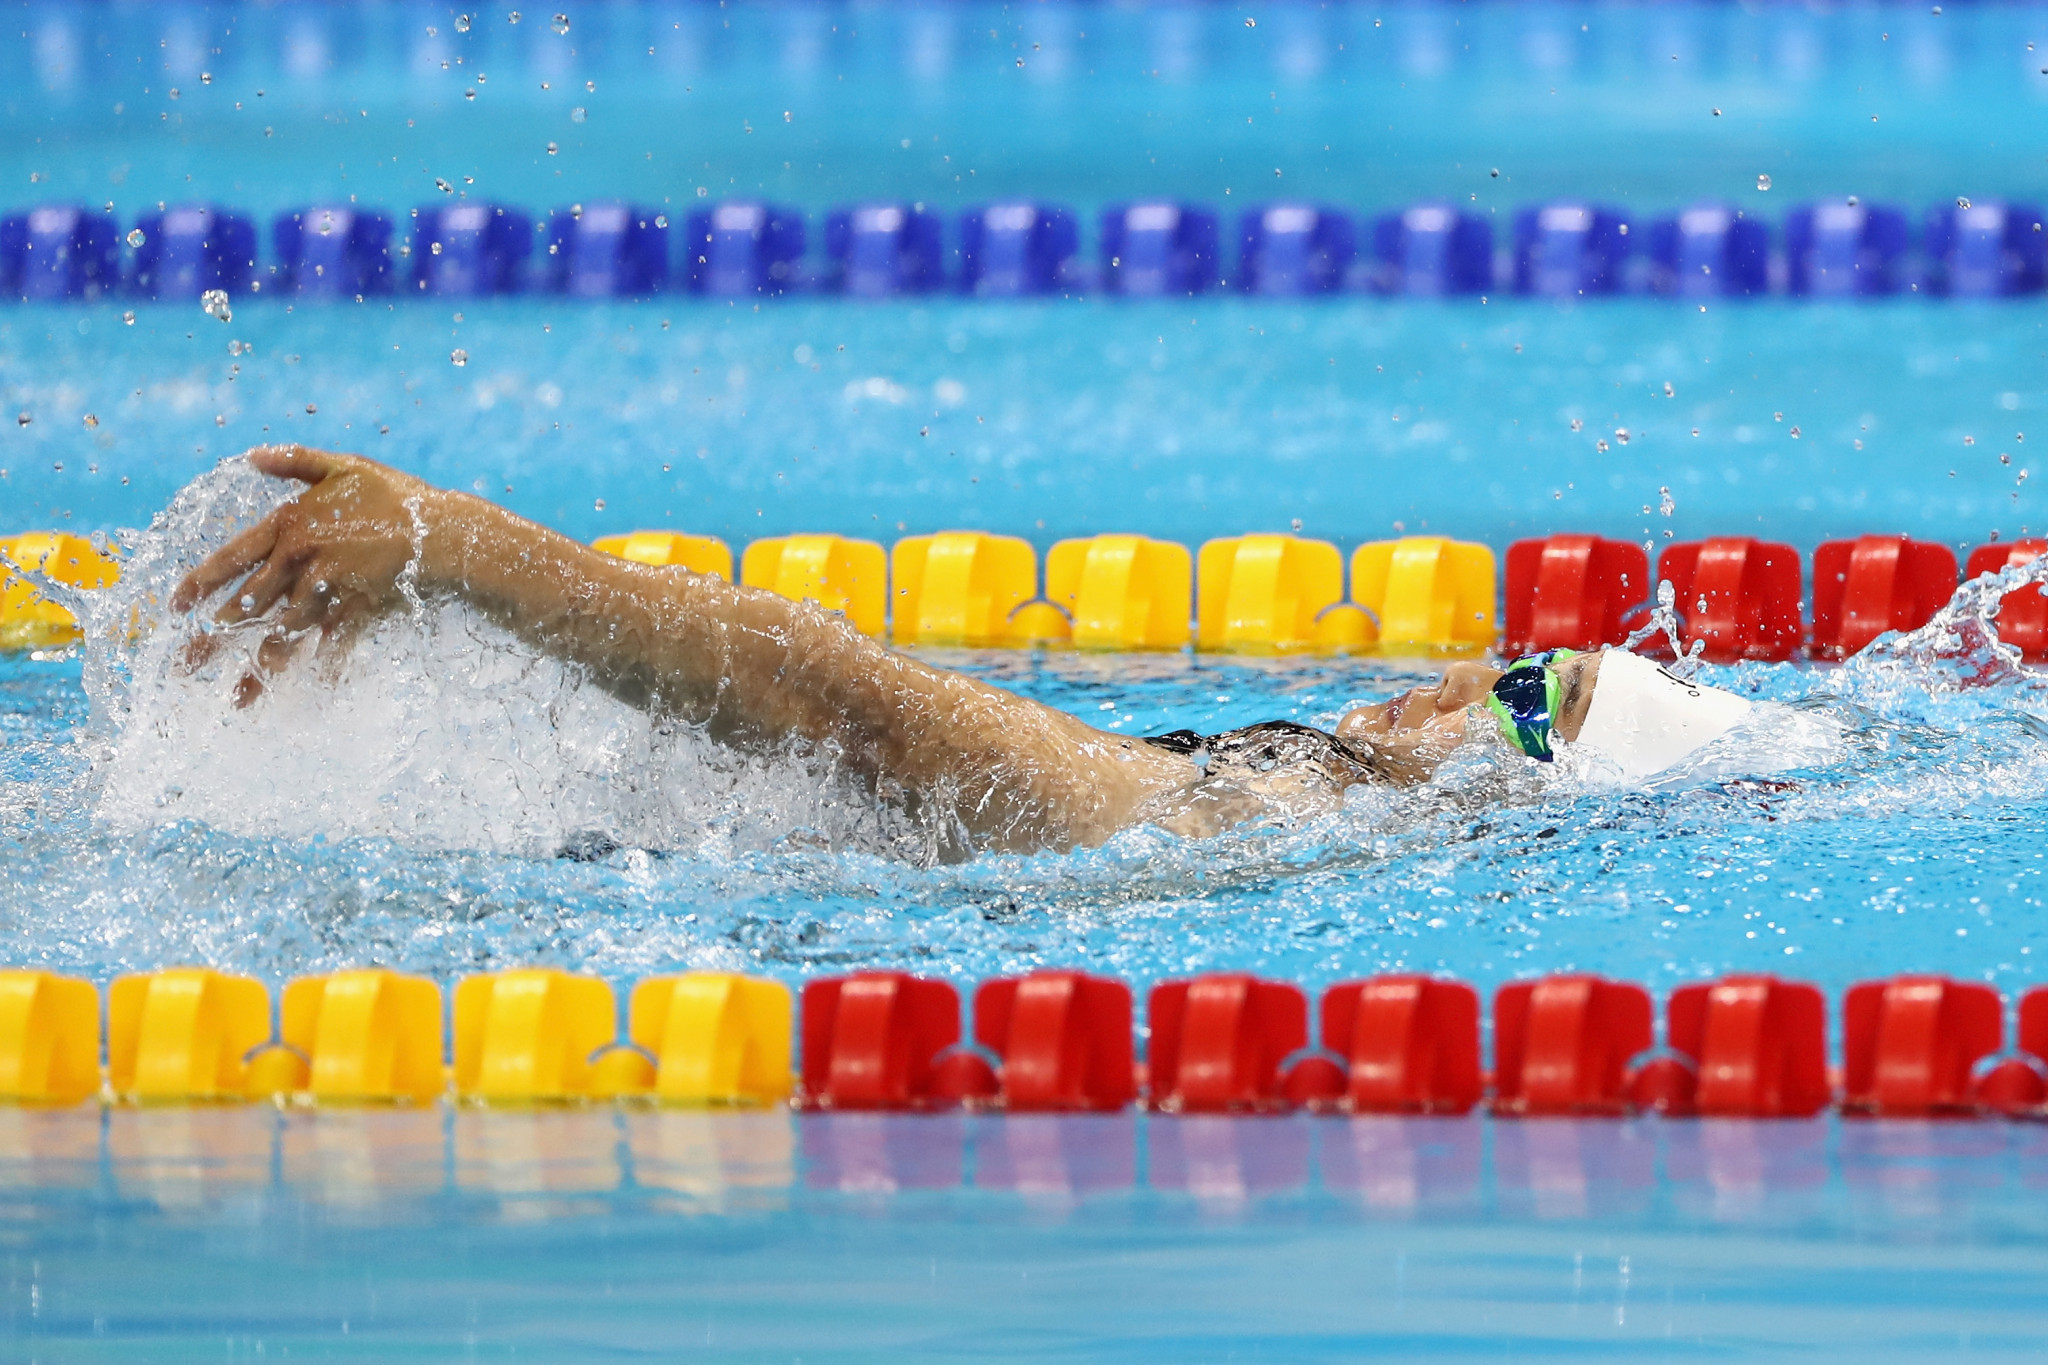 China's Jiao Cheng broke the world record to claim gold in the women's 50 metres backstroke S4 event ©Getty Images